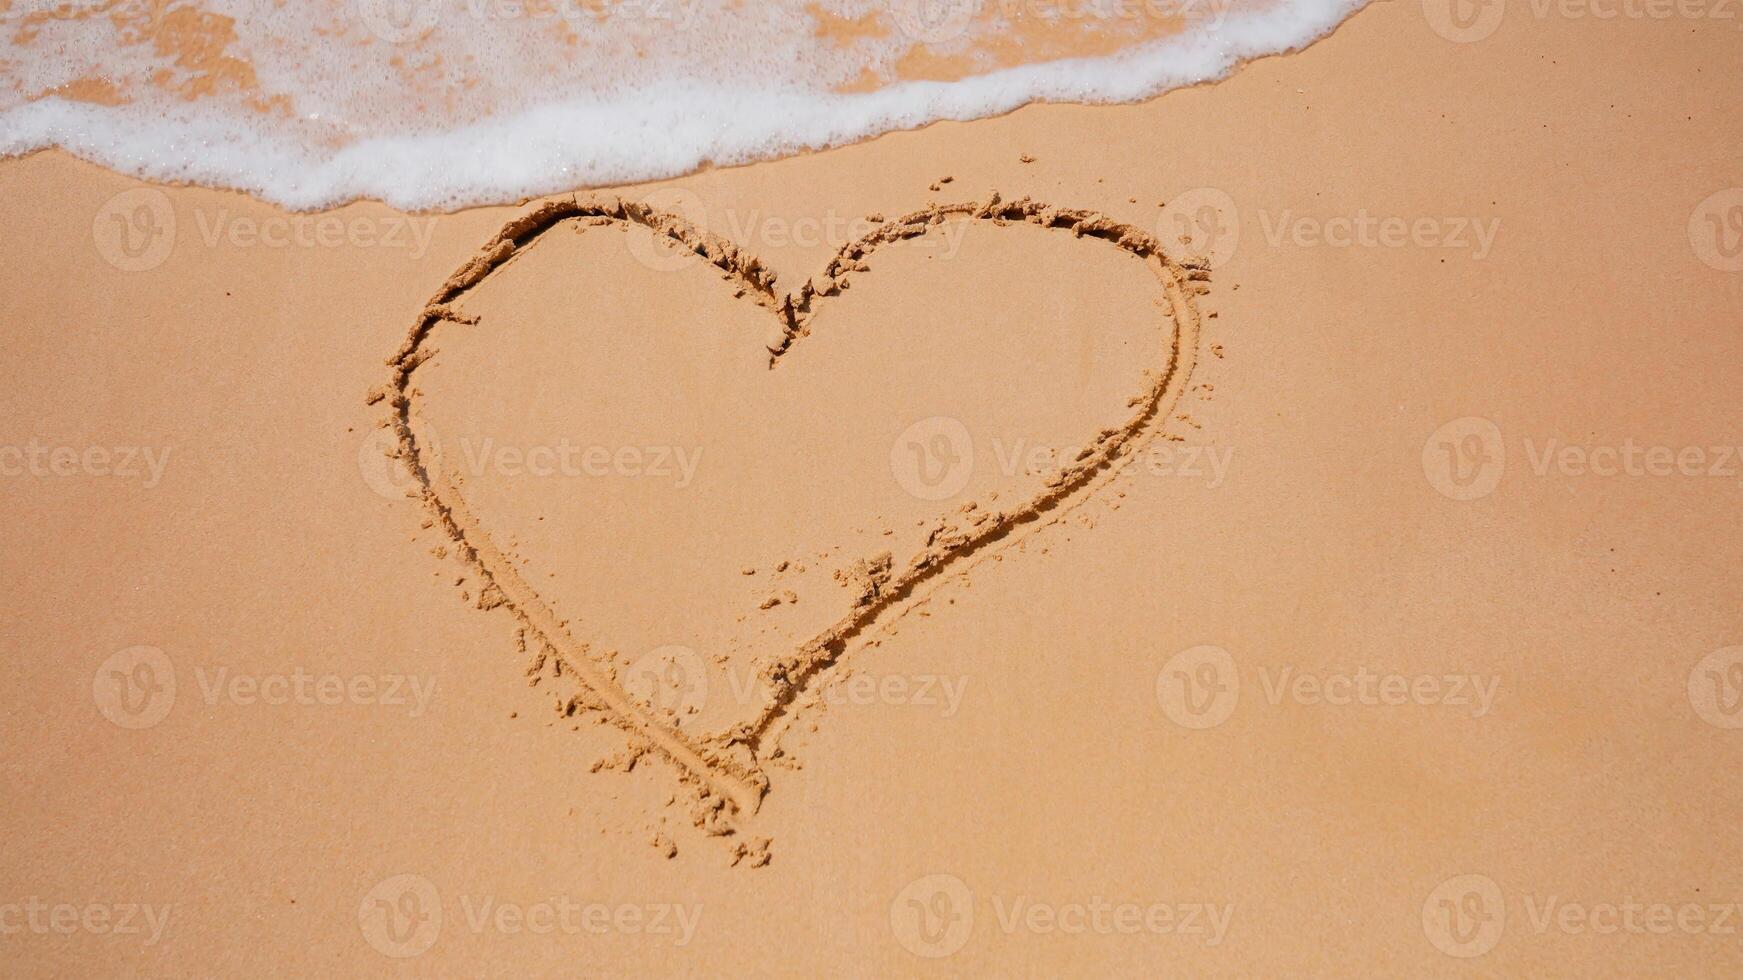 Drawing on the sand. Drawing heart. The sea shore is washed by a wave. photo